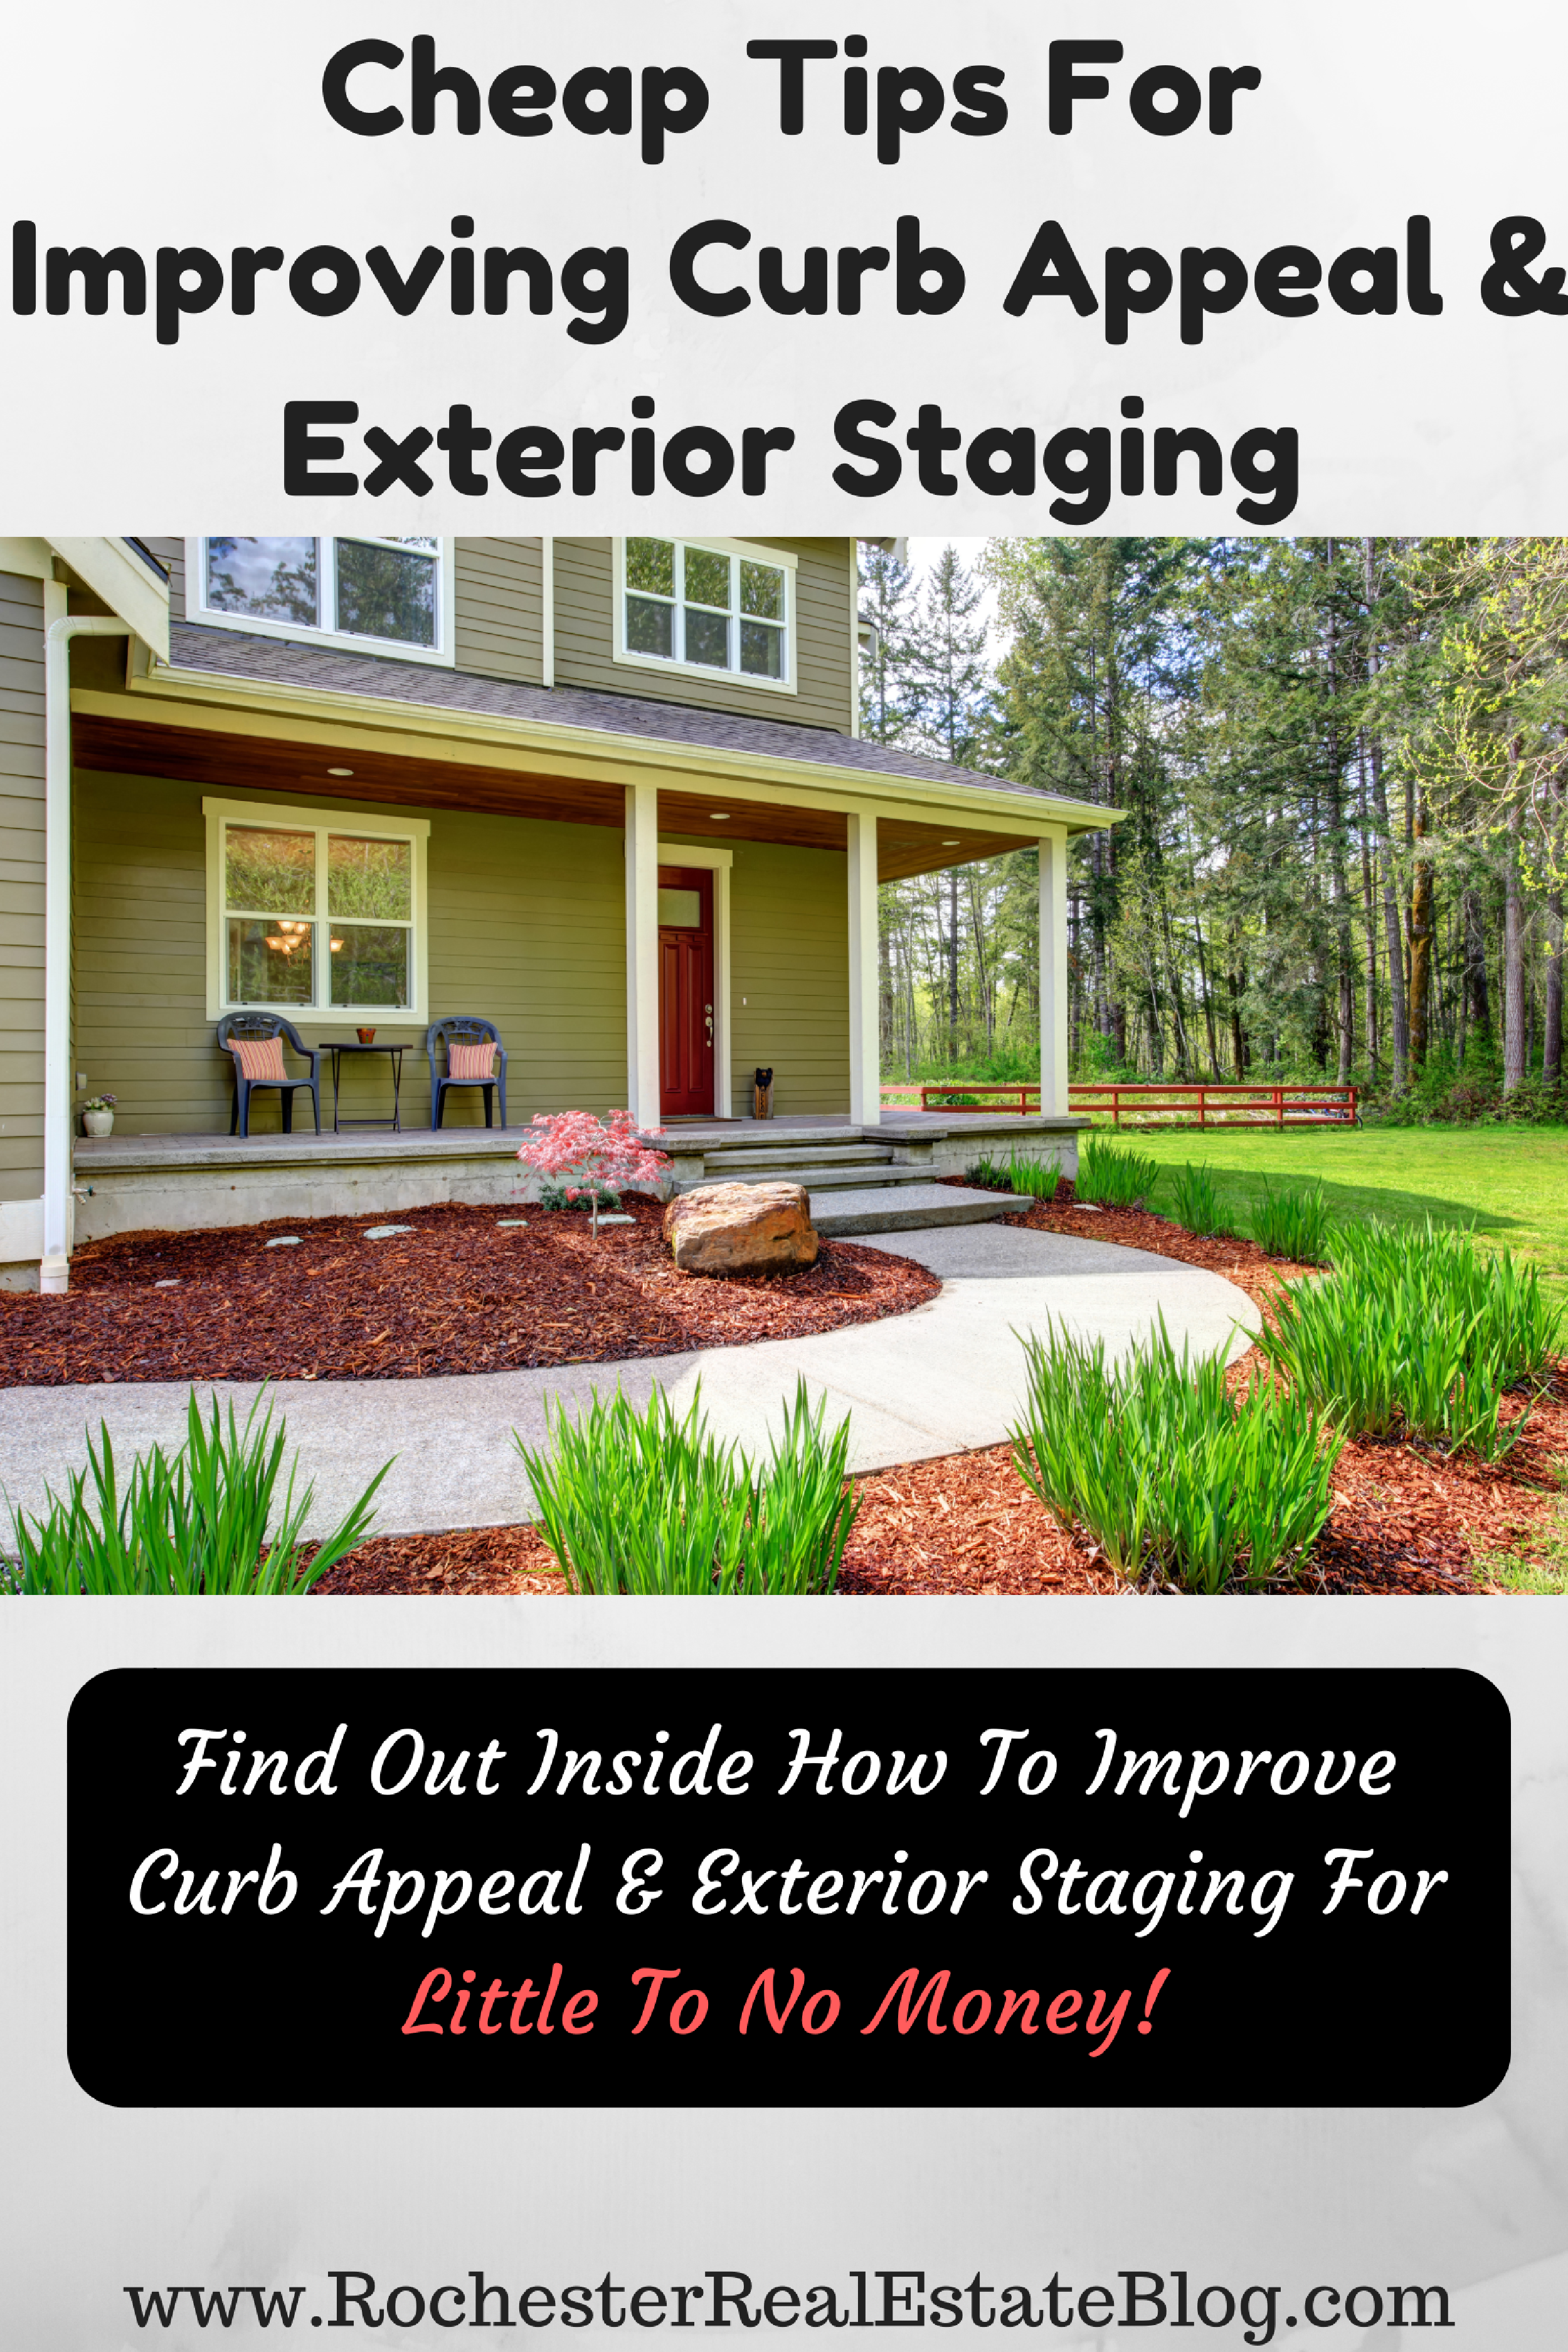 Cheap Tips For Improving Curb Appeal & Exterior Staging